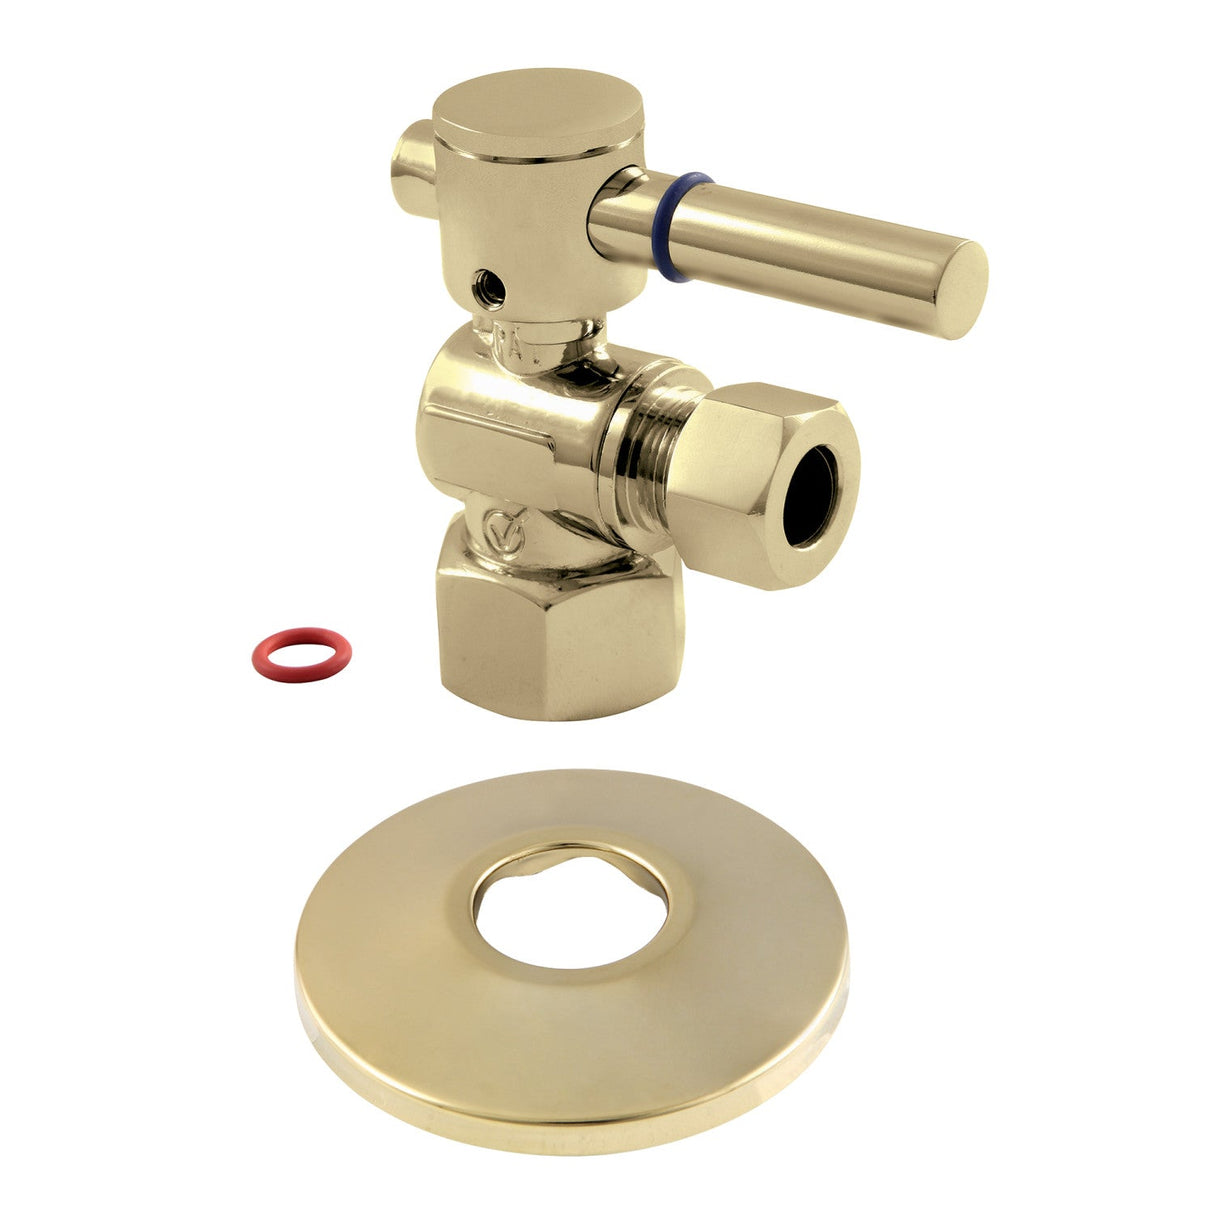 CC43102DLK 1/2-Inch FIP x 3/8-Inch OD Comp Quarter-Turn Angle Stop Valve with Flange, Polished Brass